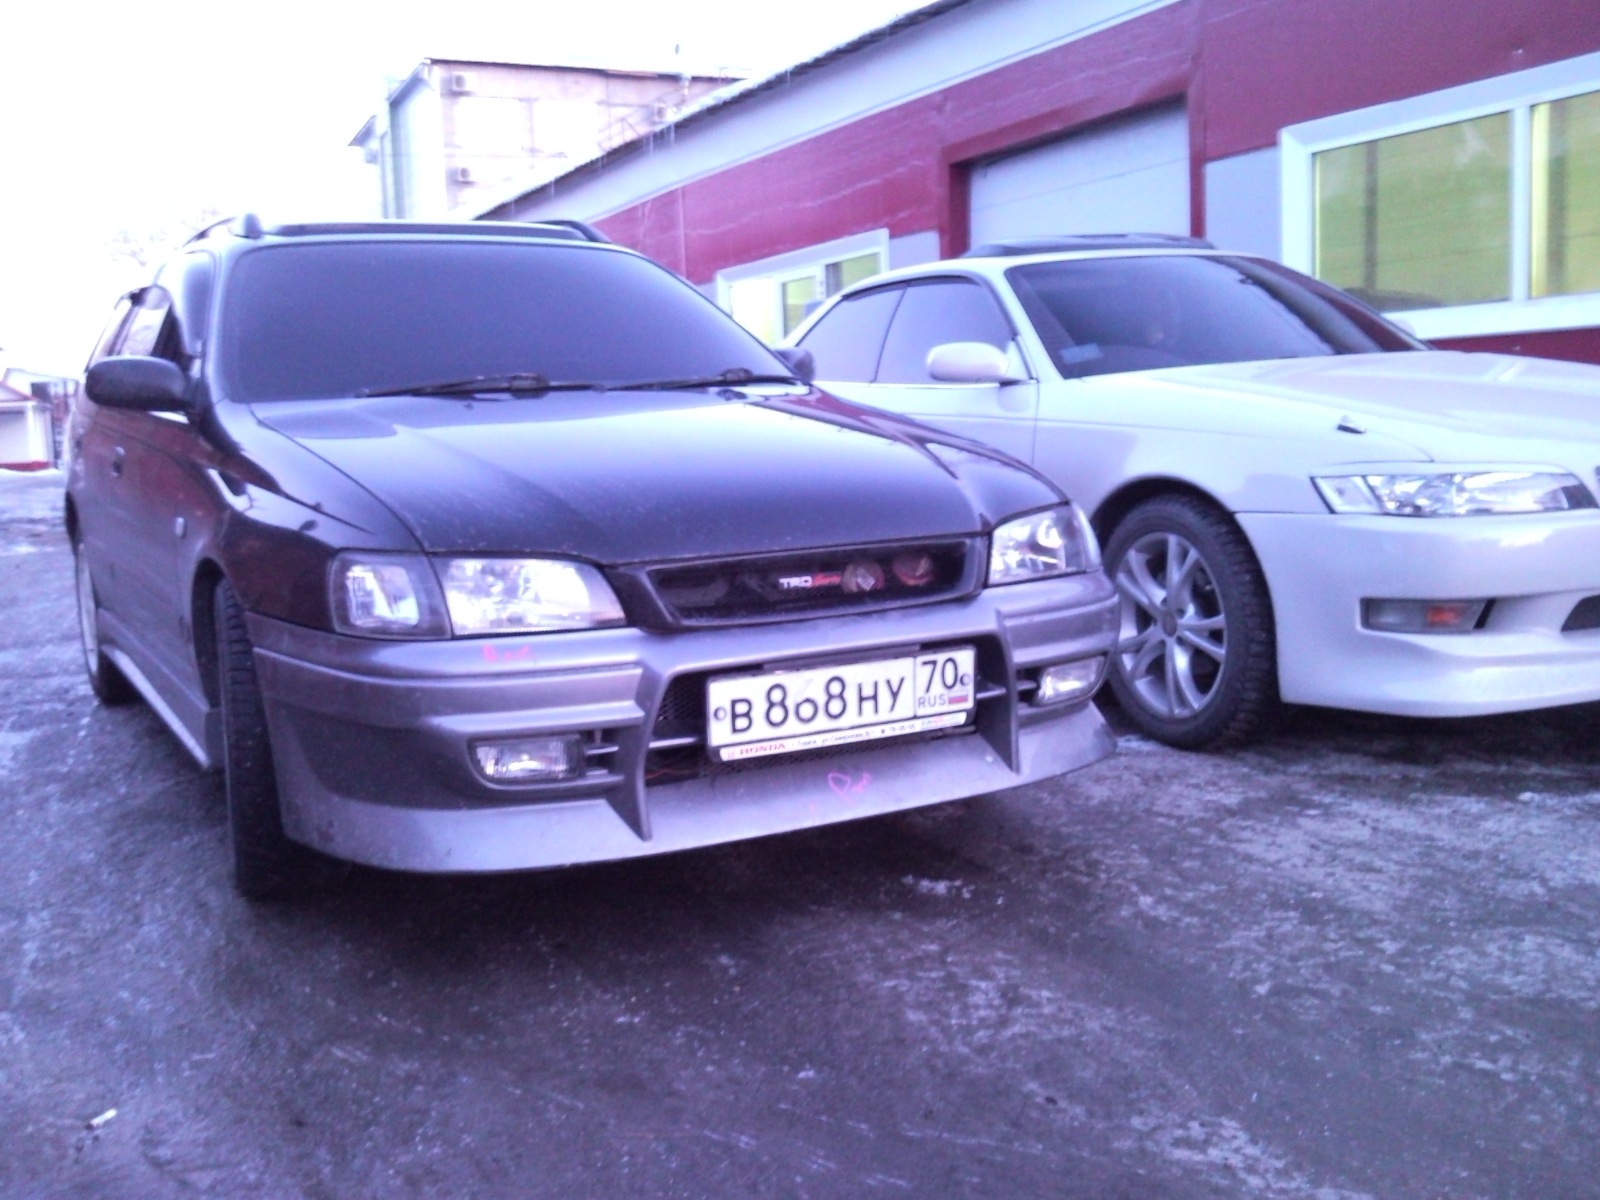 Heres something like this - bumper replacement - Toyota Caldina 20 L 1995